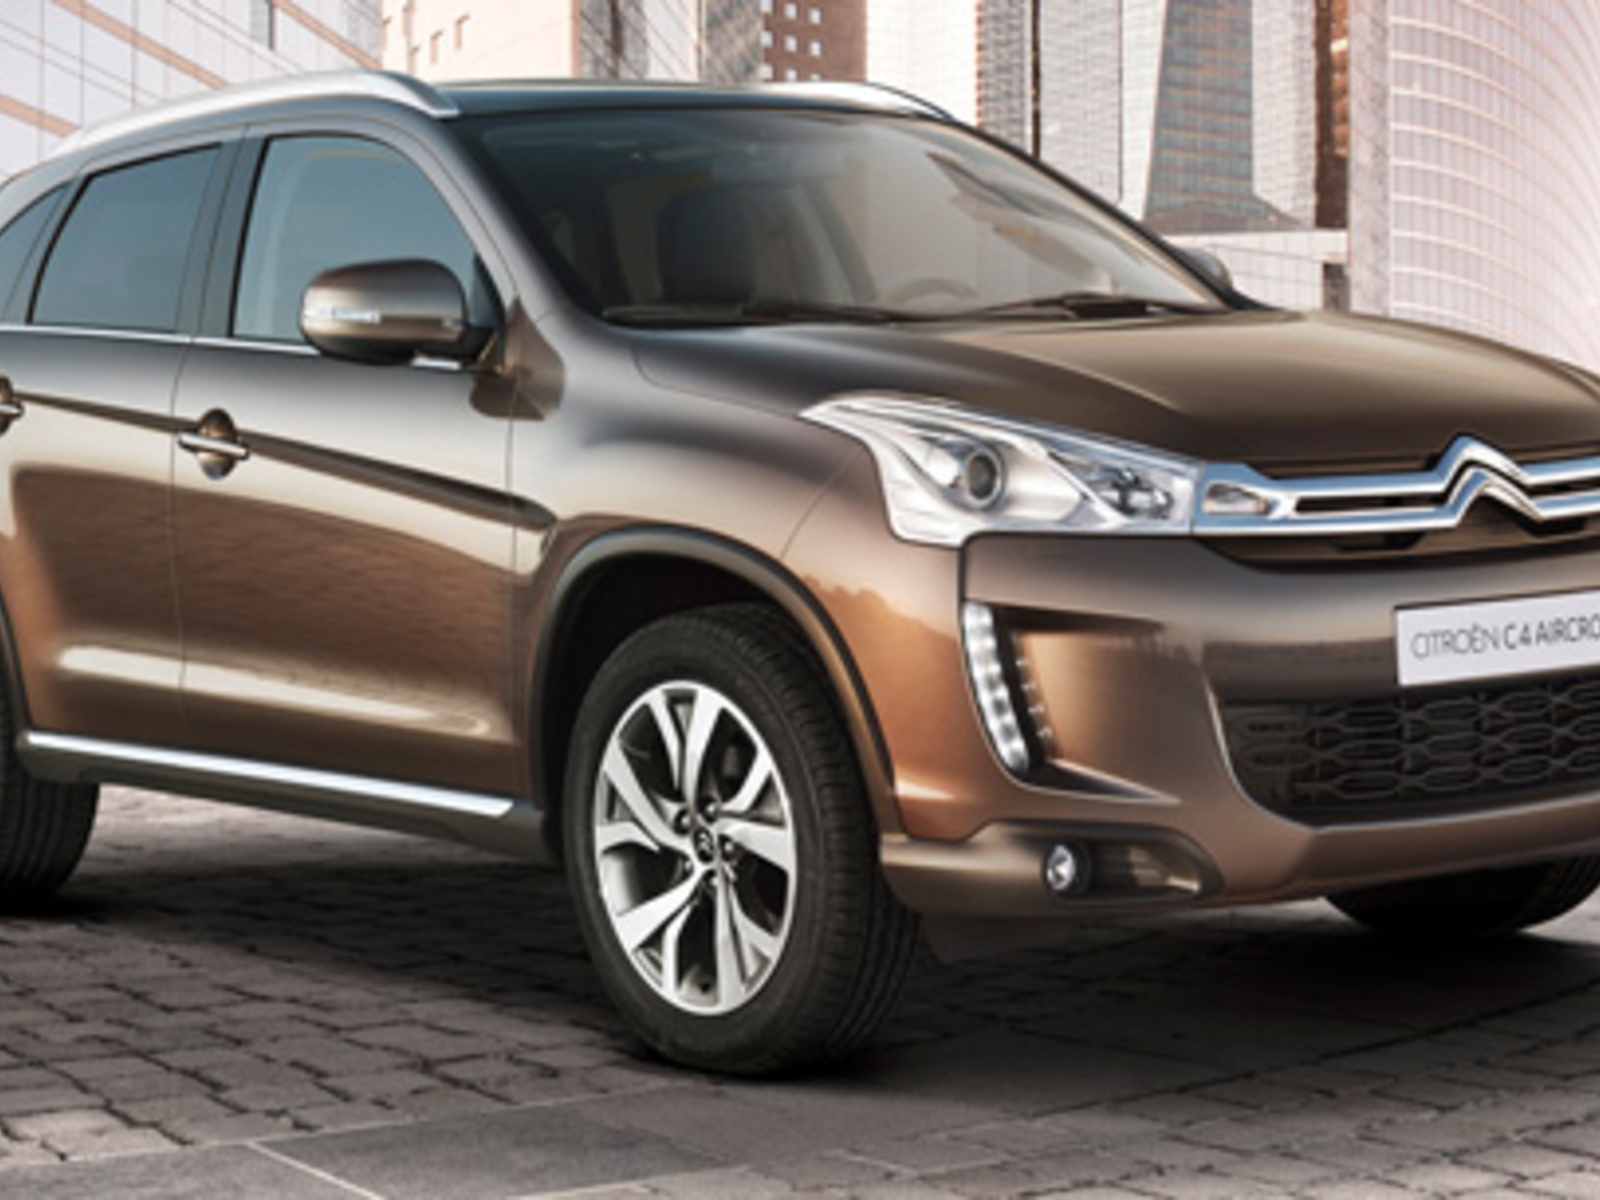 Alle Infos vom Citroen C4 Aircross - oe24.at